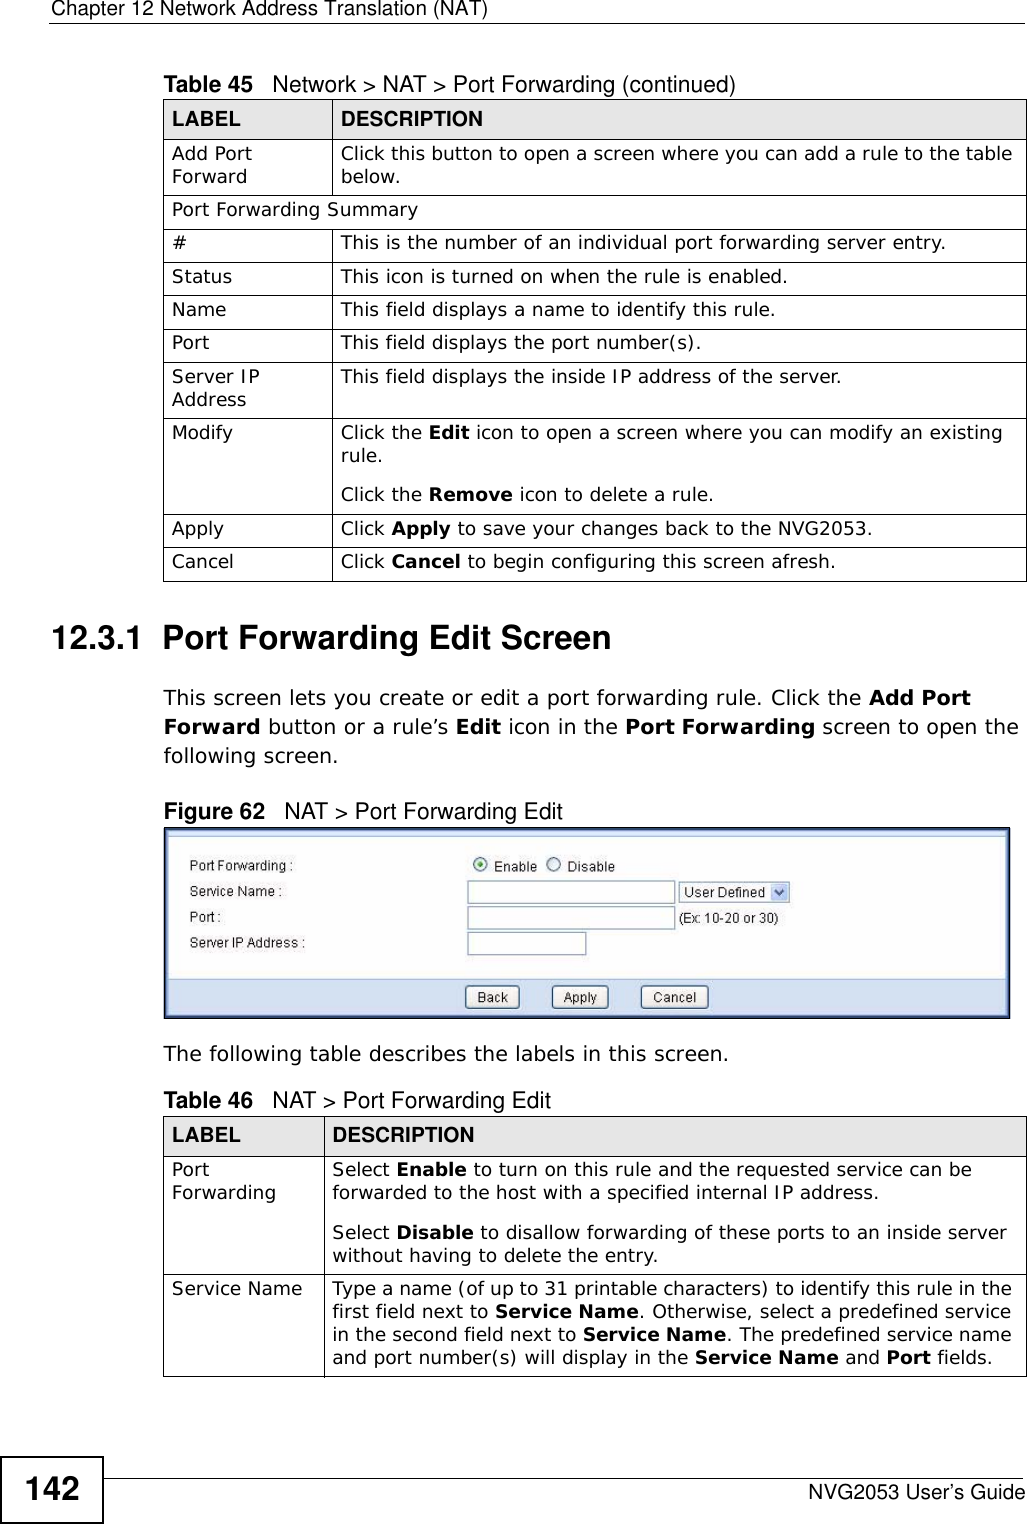 Chapter 12 Network Address Translation (NAT)NVG2053 User’s Guide14212.3.1  Port Forwarding Edit Screen This screen lets you create or edit a port forwarding rule. Click the Add Port Forward button or a rule’s Edit icon in the Port Forwarding screen to open the following screen.Figure 62   NAT &gt; Port Forwarding Edit The following table describes the labels in this screen. Add Port Forward Click this button to open a screen where you can add a rule to the table below.Port Forwarding Summary#This is the number of an individual port forwarding server entry.Status This icon is turned on when the rule is enabled. Name This field displays a name to identify this rule.Port This field displays the port number(s). Server IP Address This field displays the inside IP address of the server.Modify Click the Edit icon to open a screen where you can modify an existing rule. Click the Remove icon to delete a rule.Apply Click Apply to save your changes back to the NVG2053.Cancel Click Cancel to begin configuring this screen afresh.Table 45   Network &gt; NAT &gt; Port Forwarding (continued)LABEL DESCRIPTIONTable 46   NAT &gt; Port Forwarding EditLABEL DESCRIPTIONPort Forwarding Select Enable to turn on this rule and the requested service can be forwarded to the host with a specified internal IP address.Select Disable to disallow forwarding of these ports to an inside server without having to delete the entry. Service Name Type a name (of up to 31 printable characters) to identify this rule in the first field next to Service Name. Otherwise, select a predefined service in the second field next to Service Name. The predefined service name and port number(s) will display in the Service Name and Port fields.